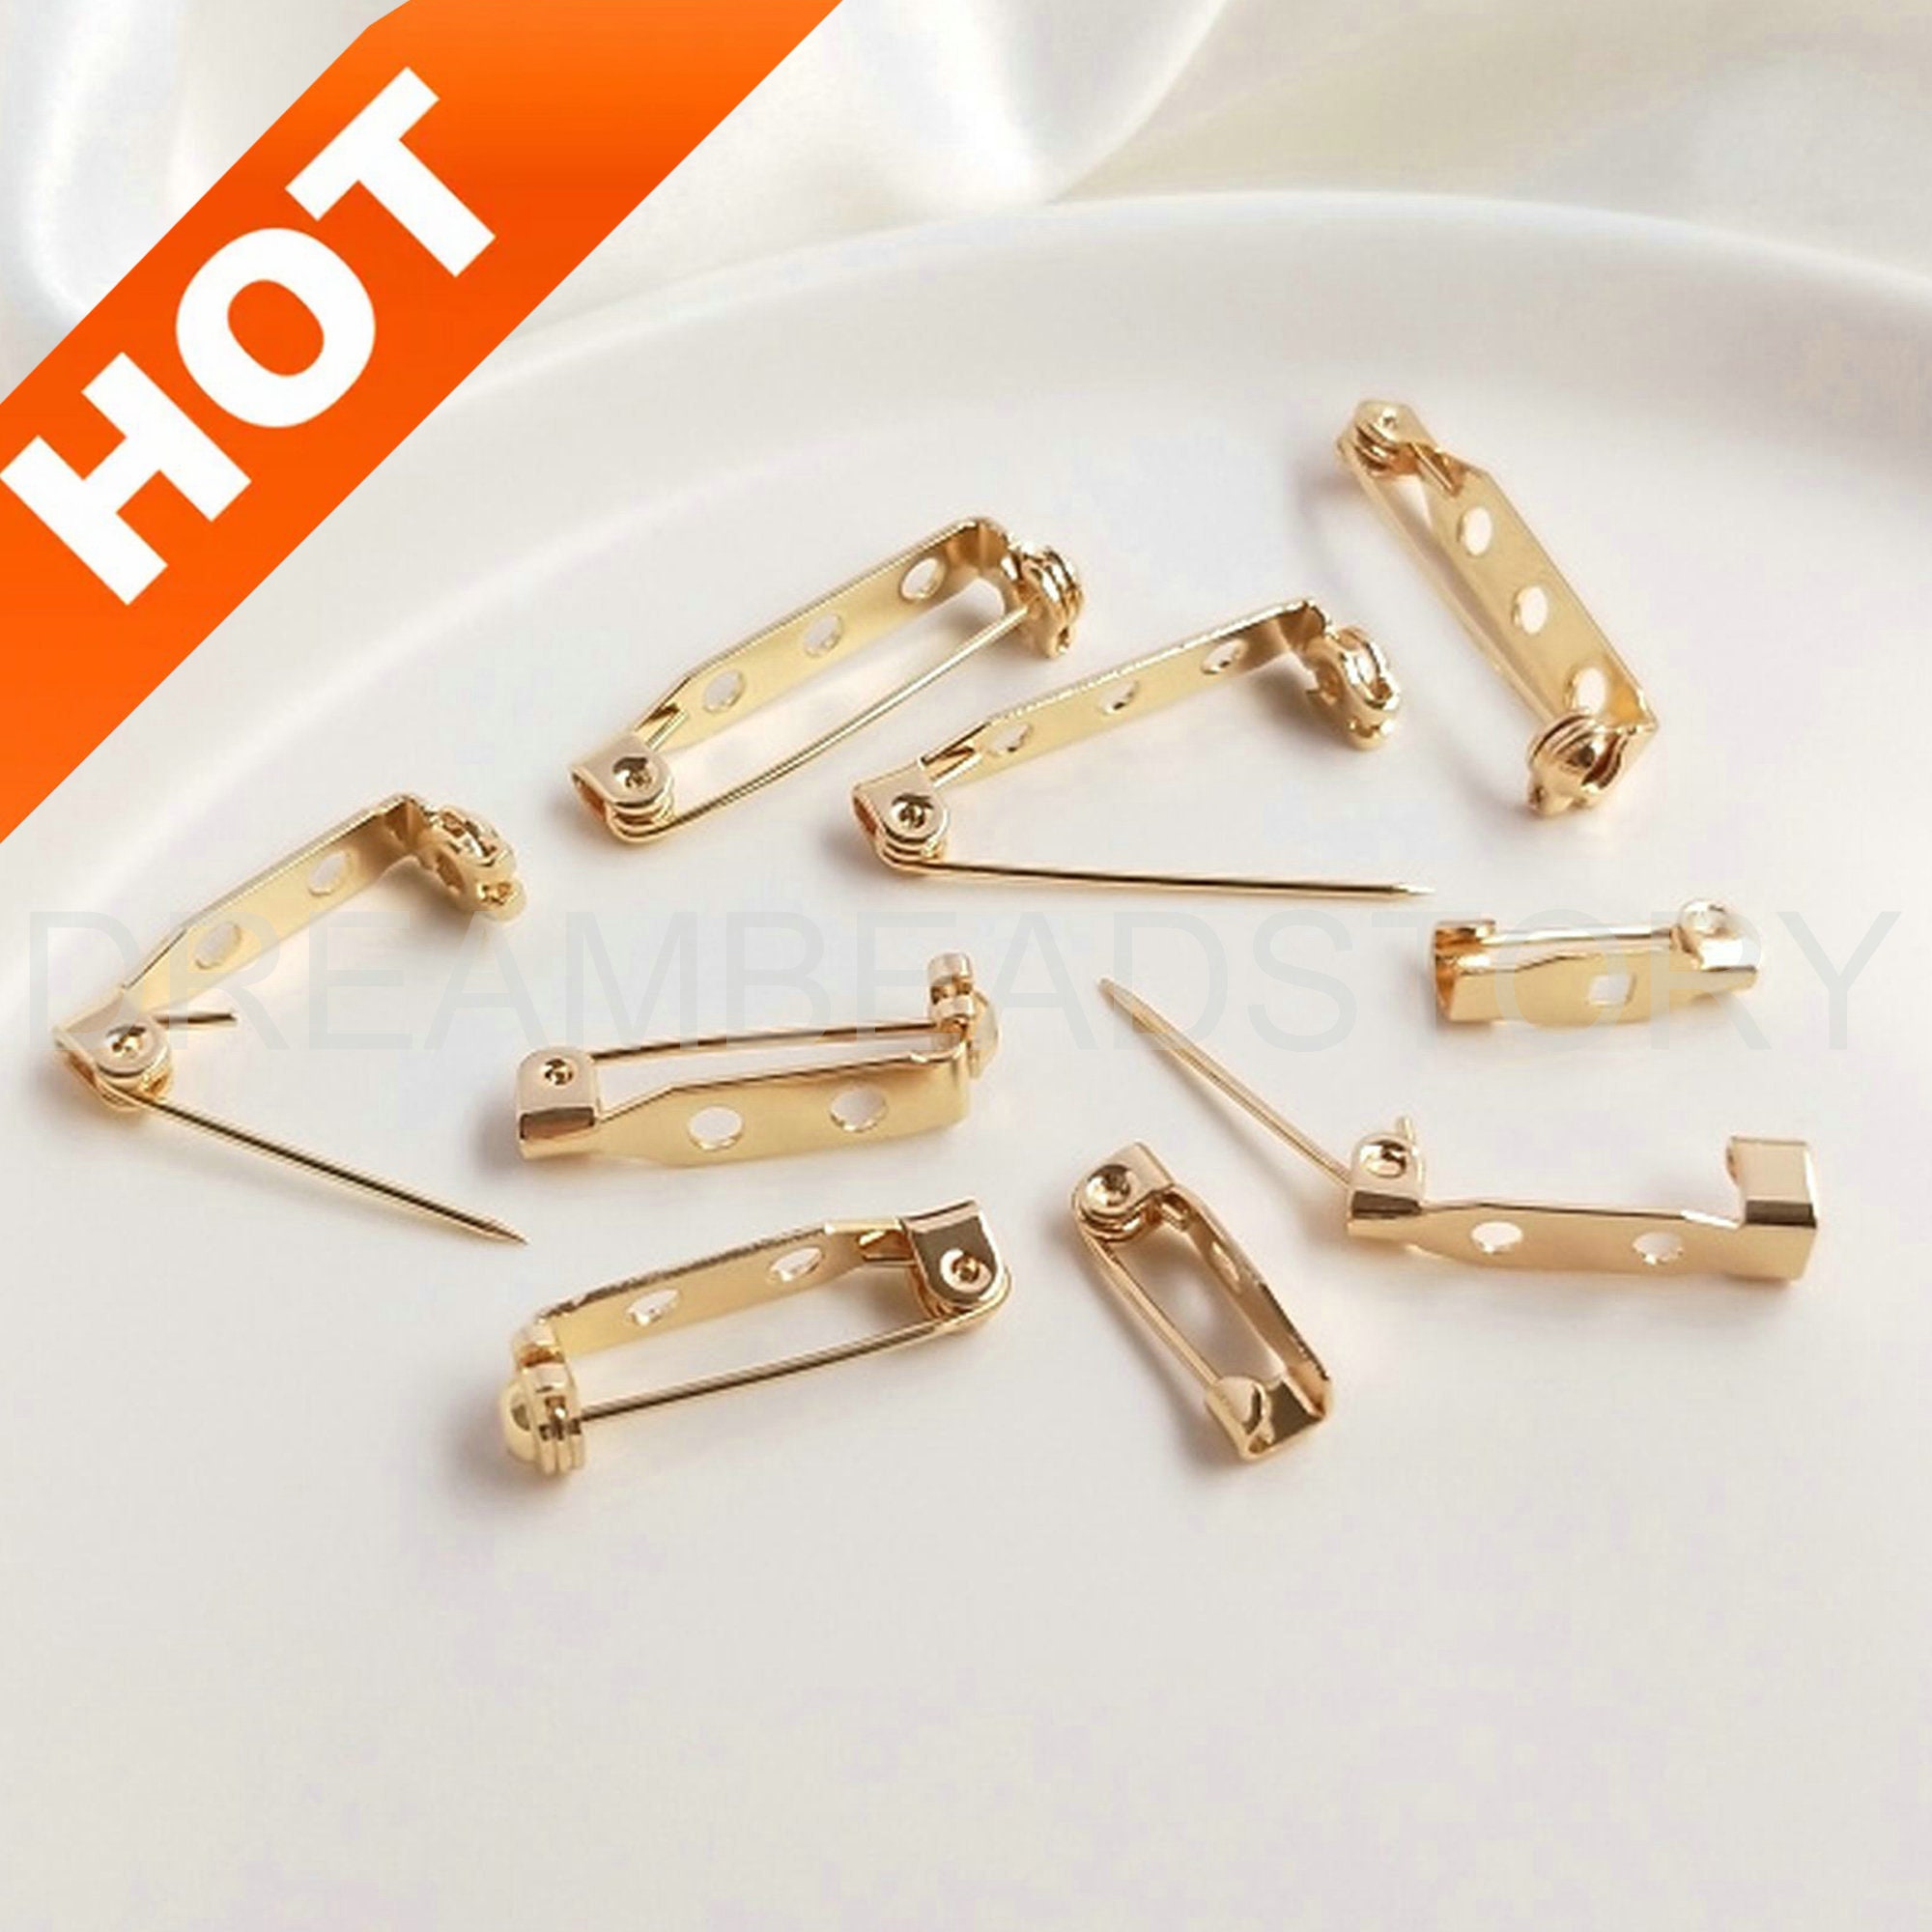 10mm X 7mm Locking Pin Backs Locking Clutch Secure Pin Back for Jewelry  Brooches Fastening Clasps, Name Badge Keepers Hooks Crafts, DIY 